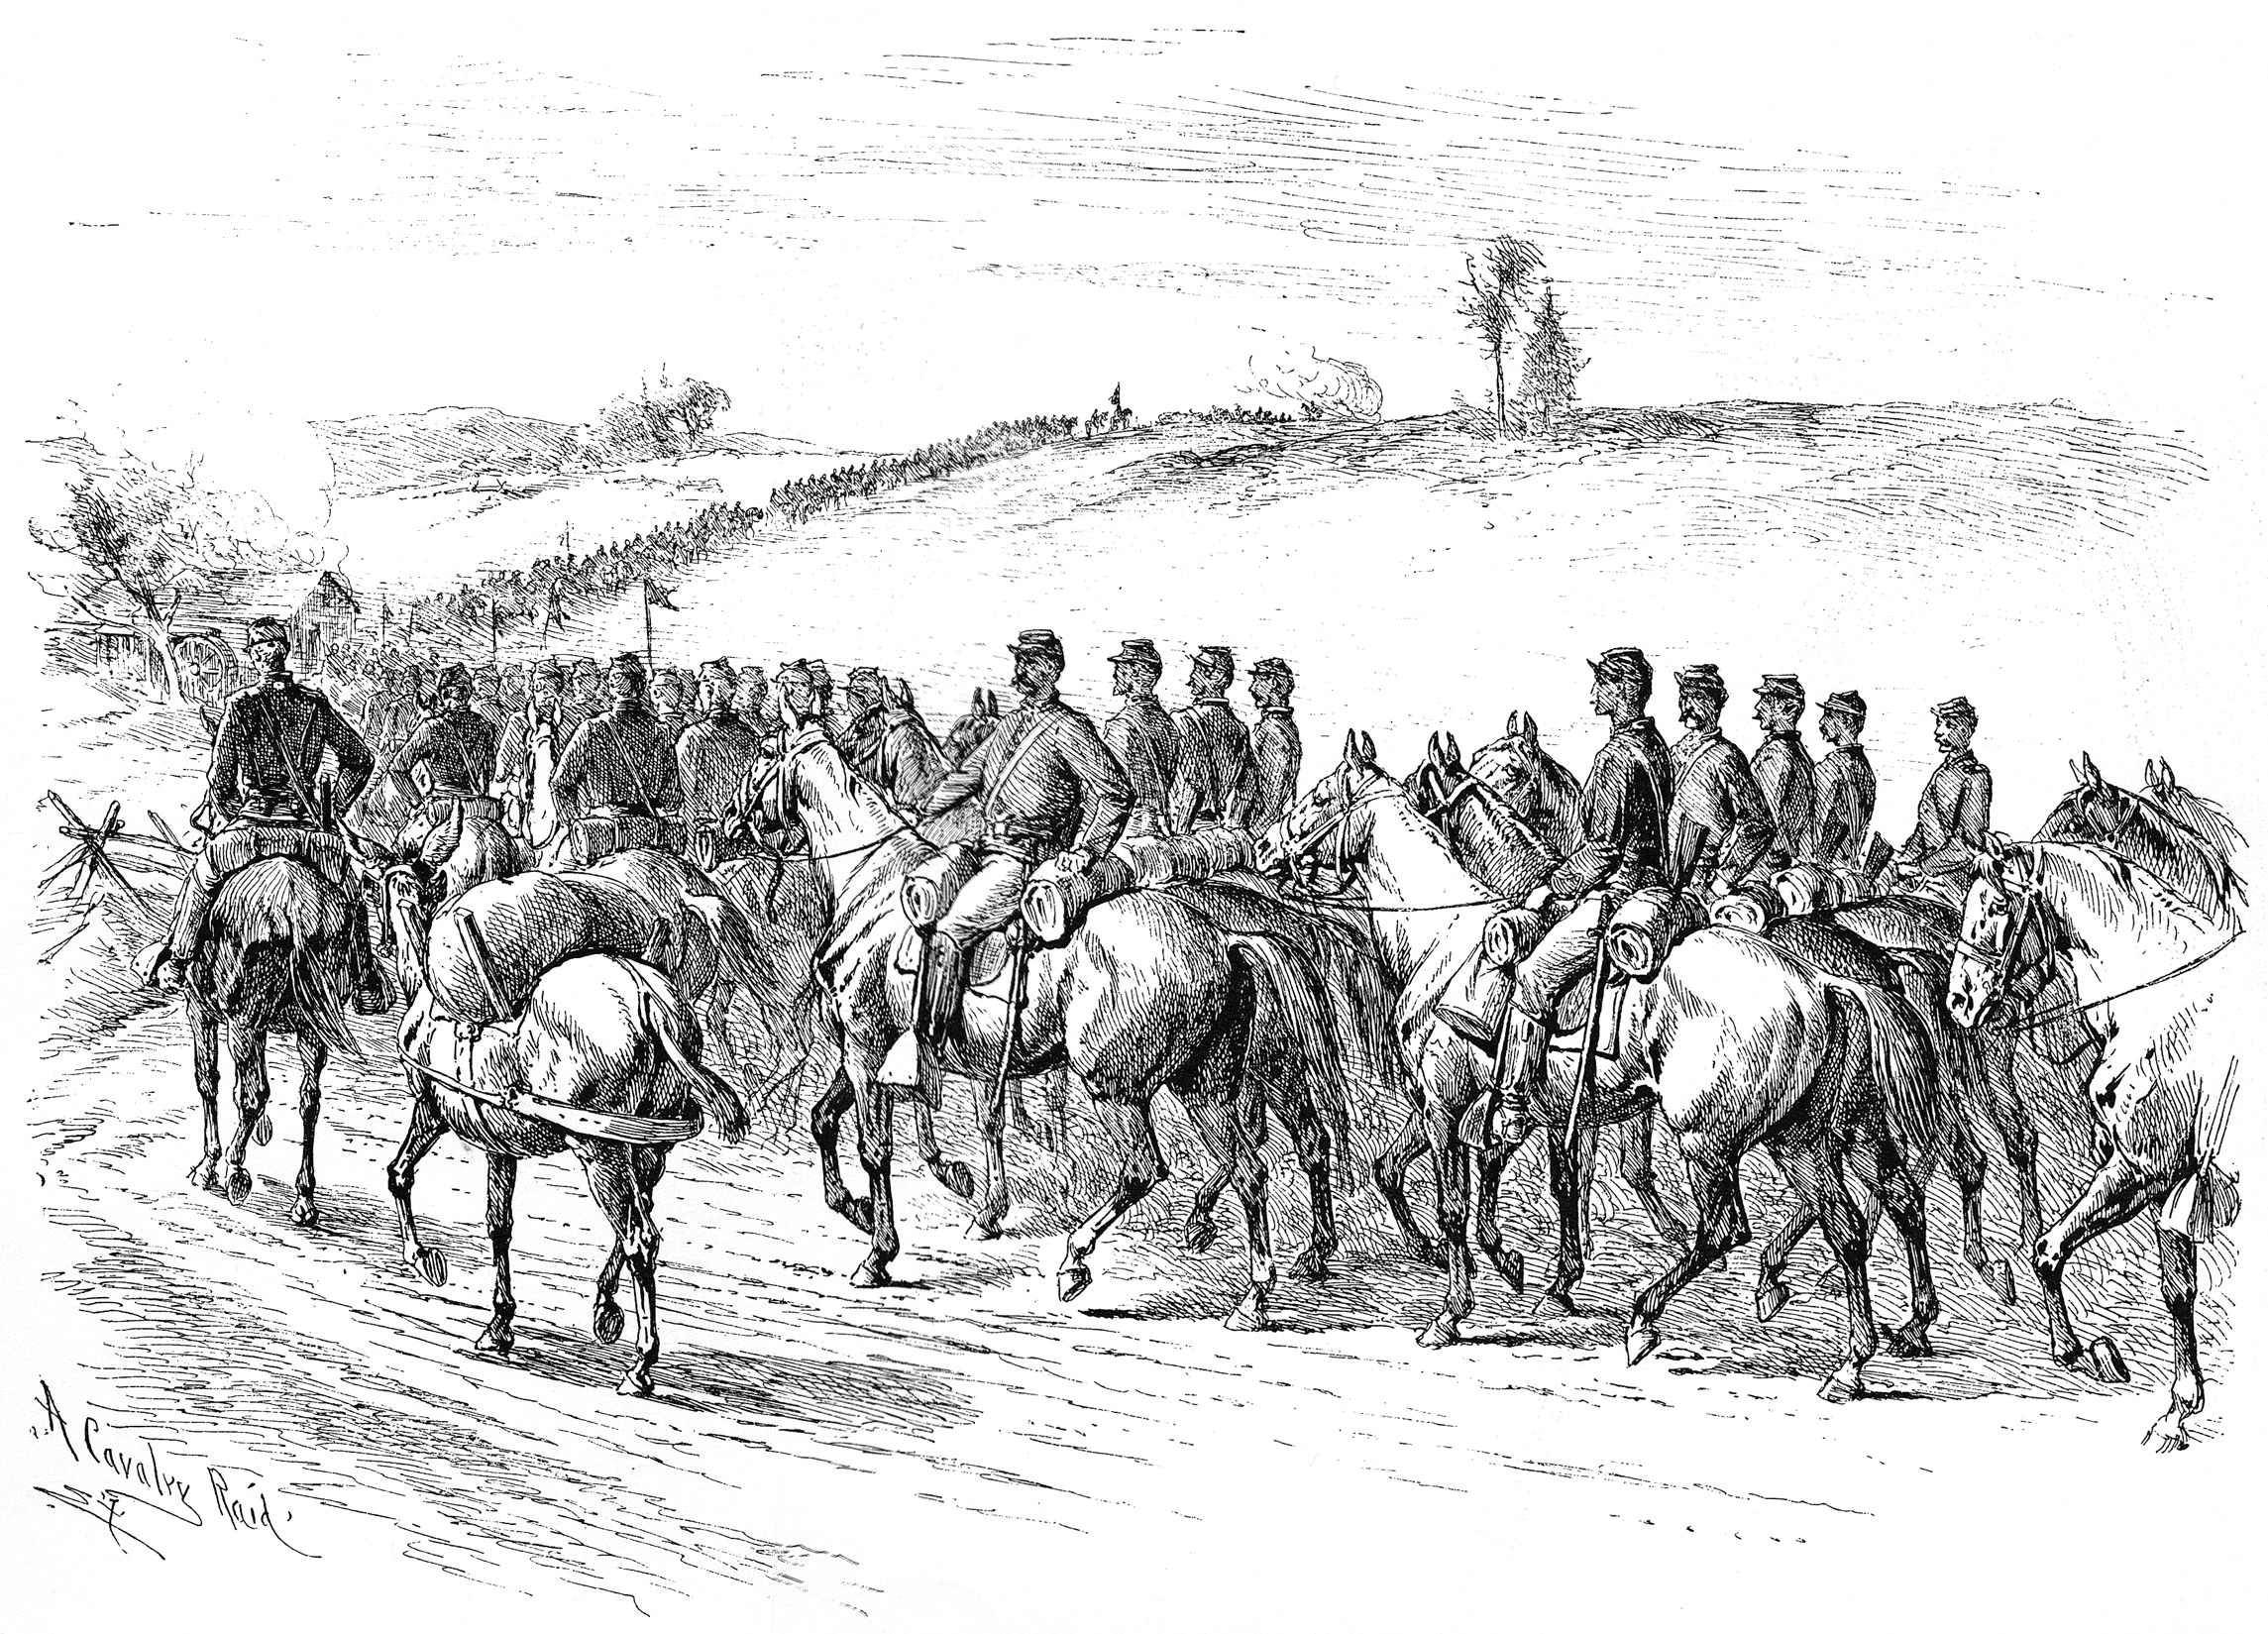 An orderly, disciplined Union cavalry division rides smartly through enemy territory in this drawing by Edwin Forbes. Sheridan’s raid on Richmond included over 10,000 troopers, plus 32 pieces of artillery.